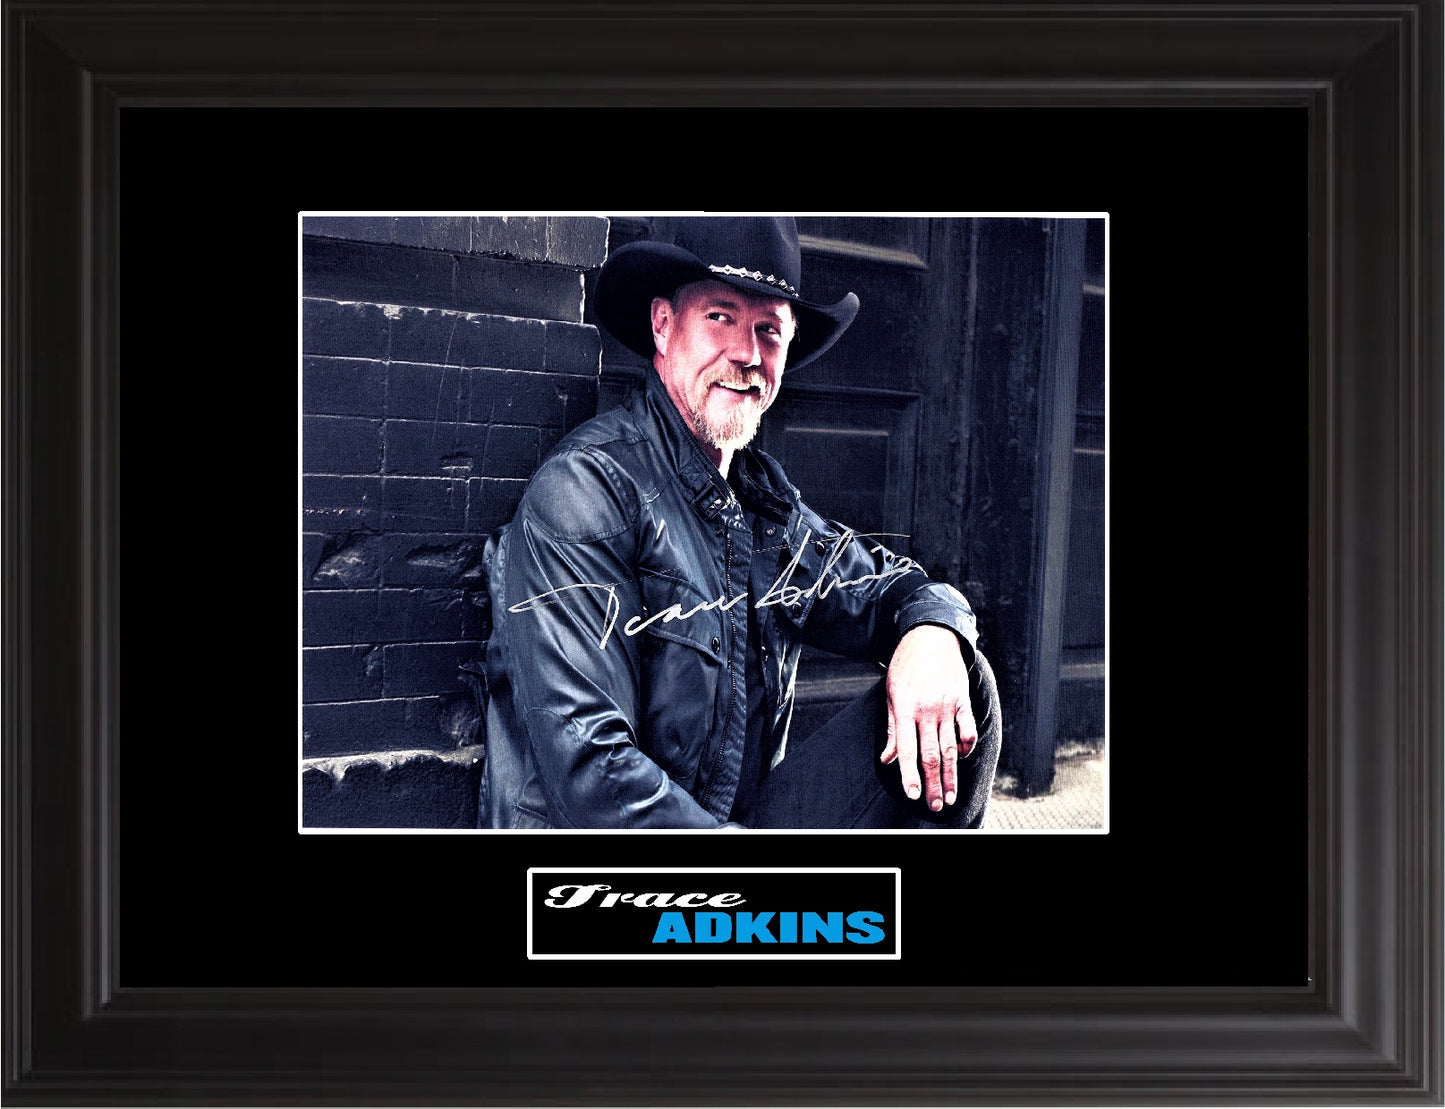 Trace Adkins Autographed Photo - Zion Graphic Collectibles